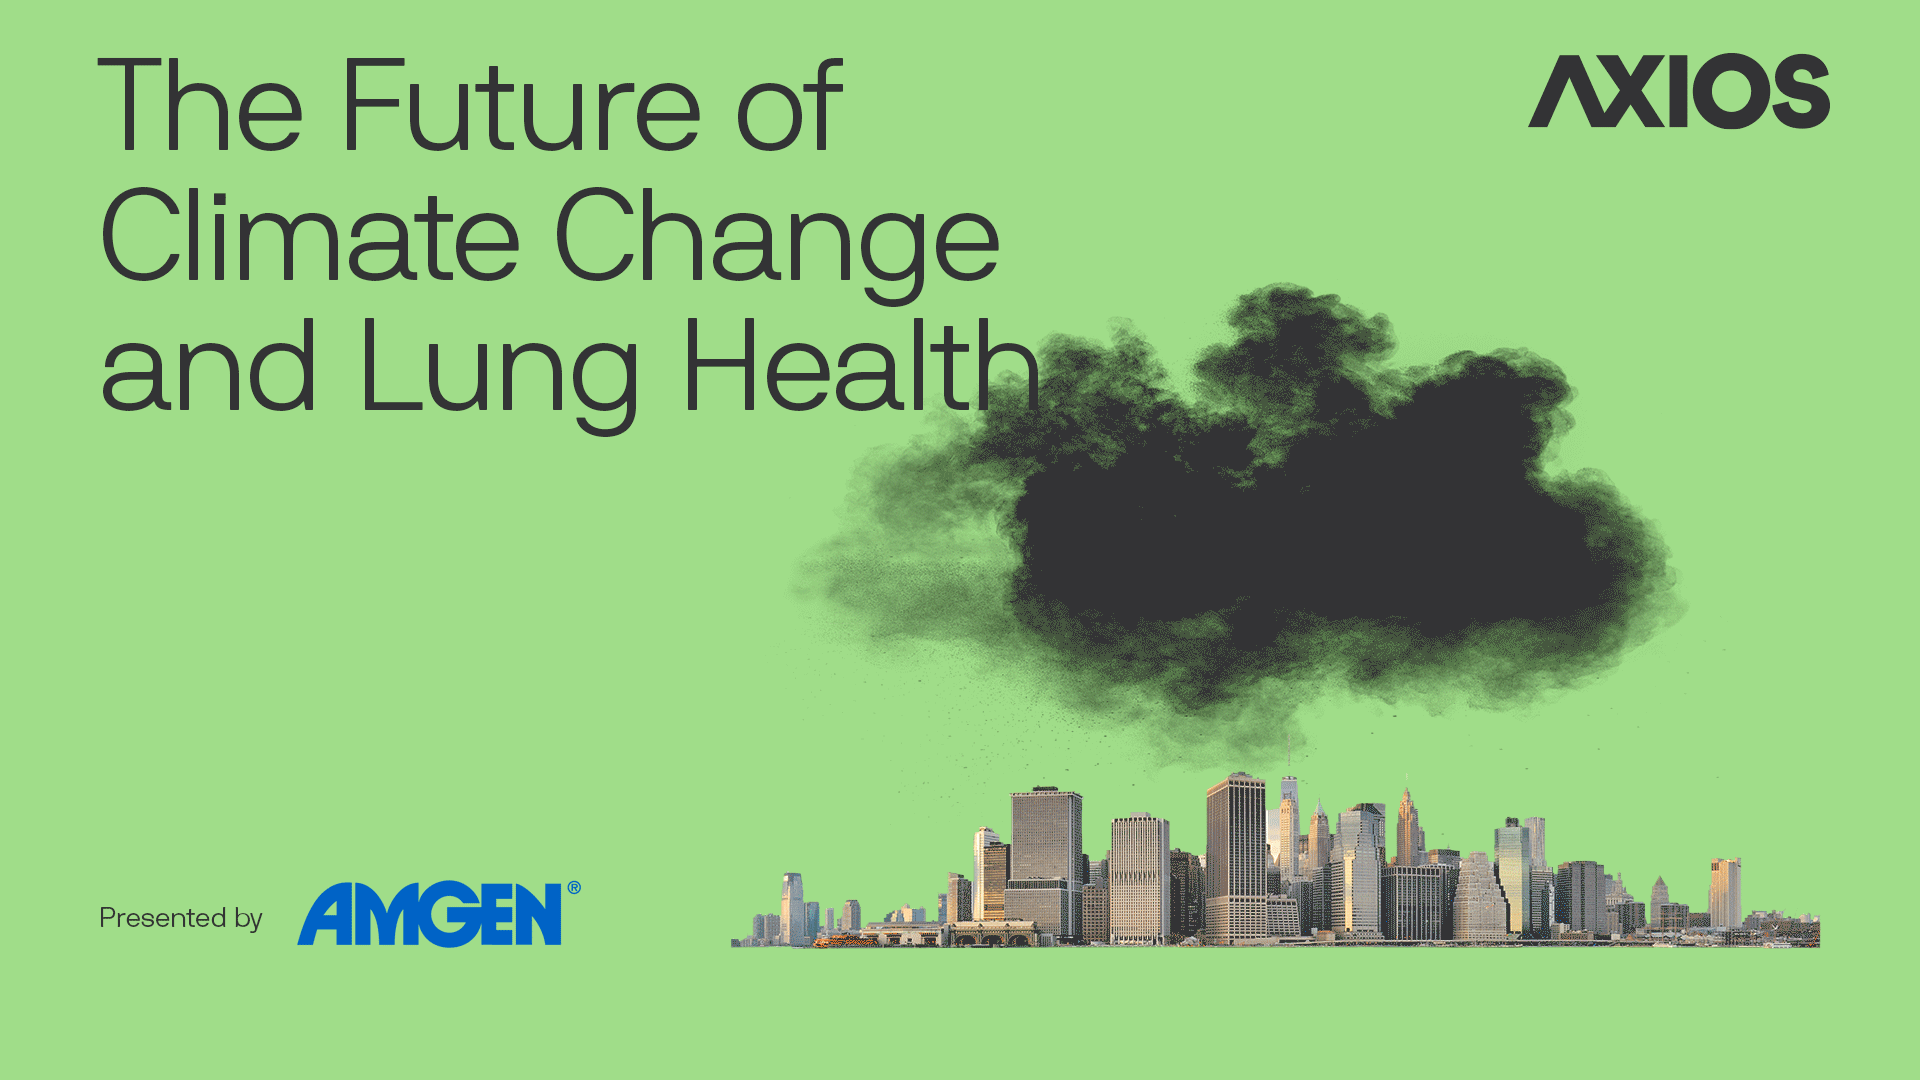 The Future of Climate Change & Lung Health